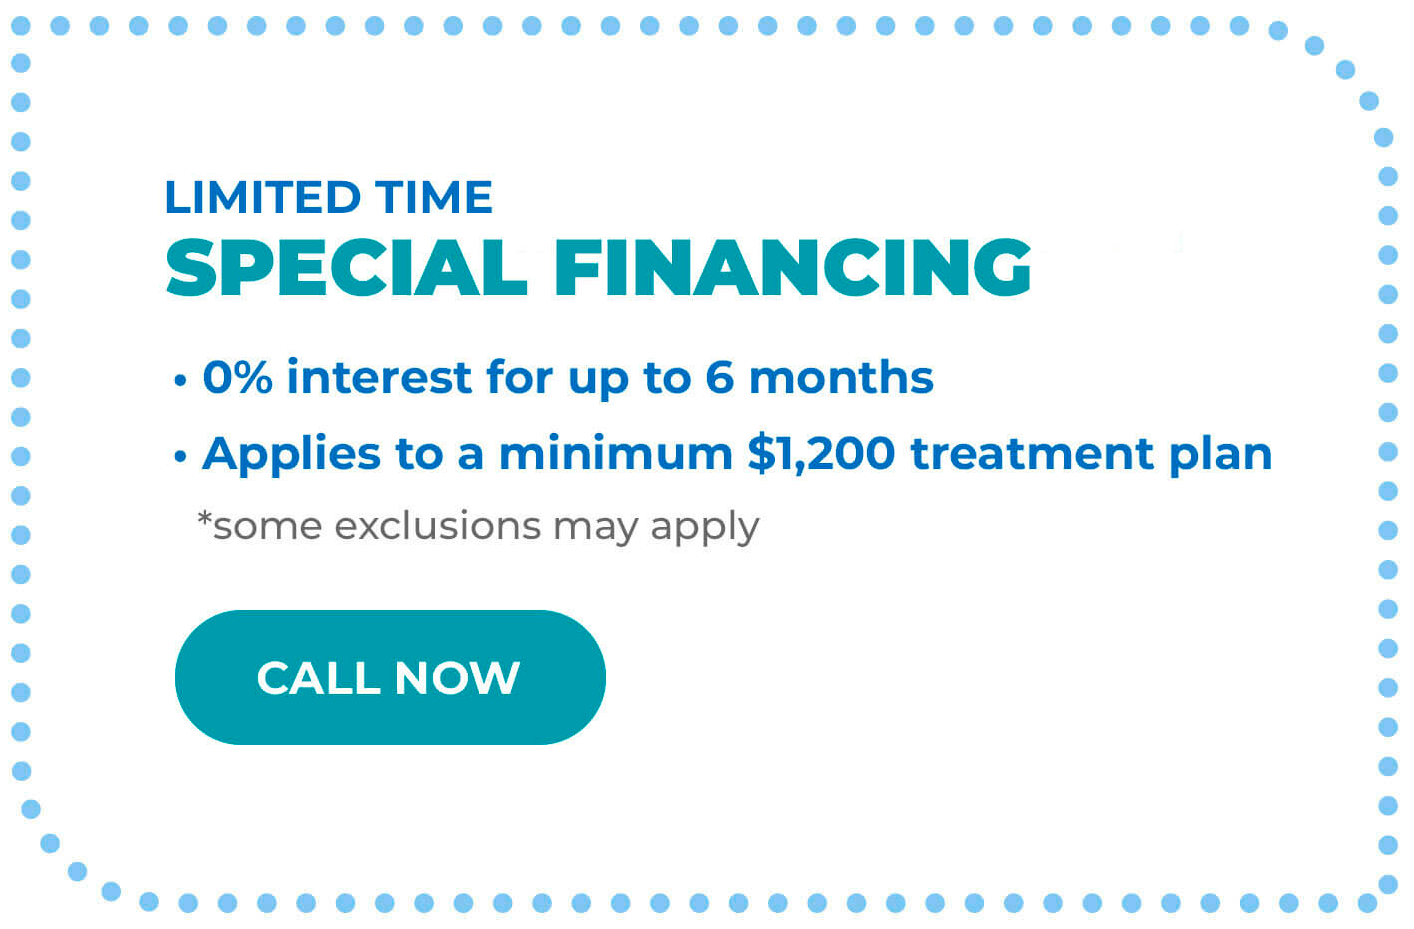 Limited Time special financing - Call Now